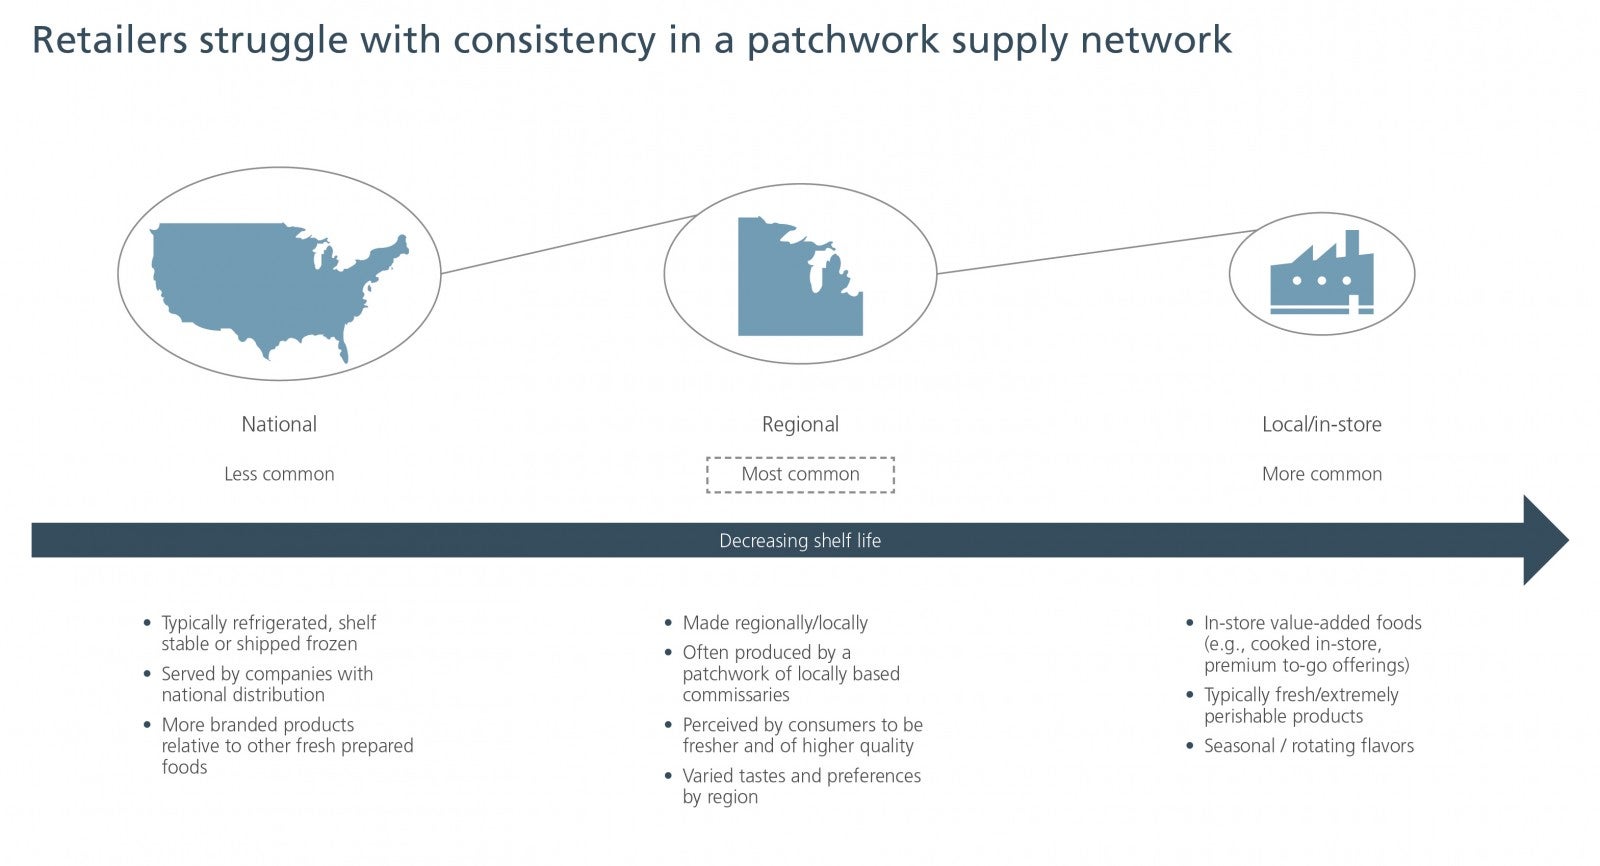 Retailers struggle with consistency in a patchwork supply network